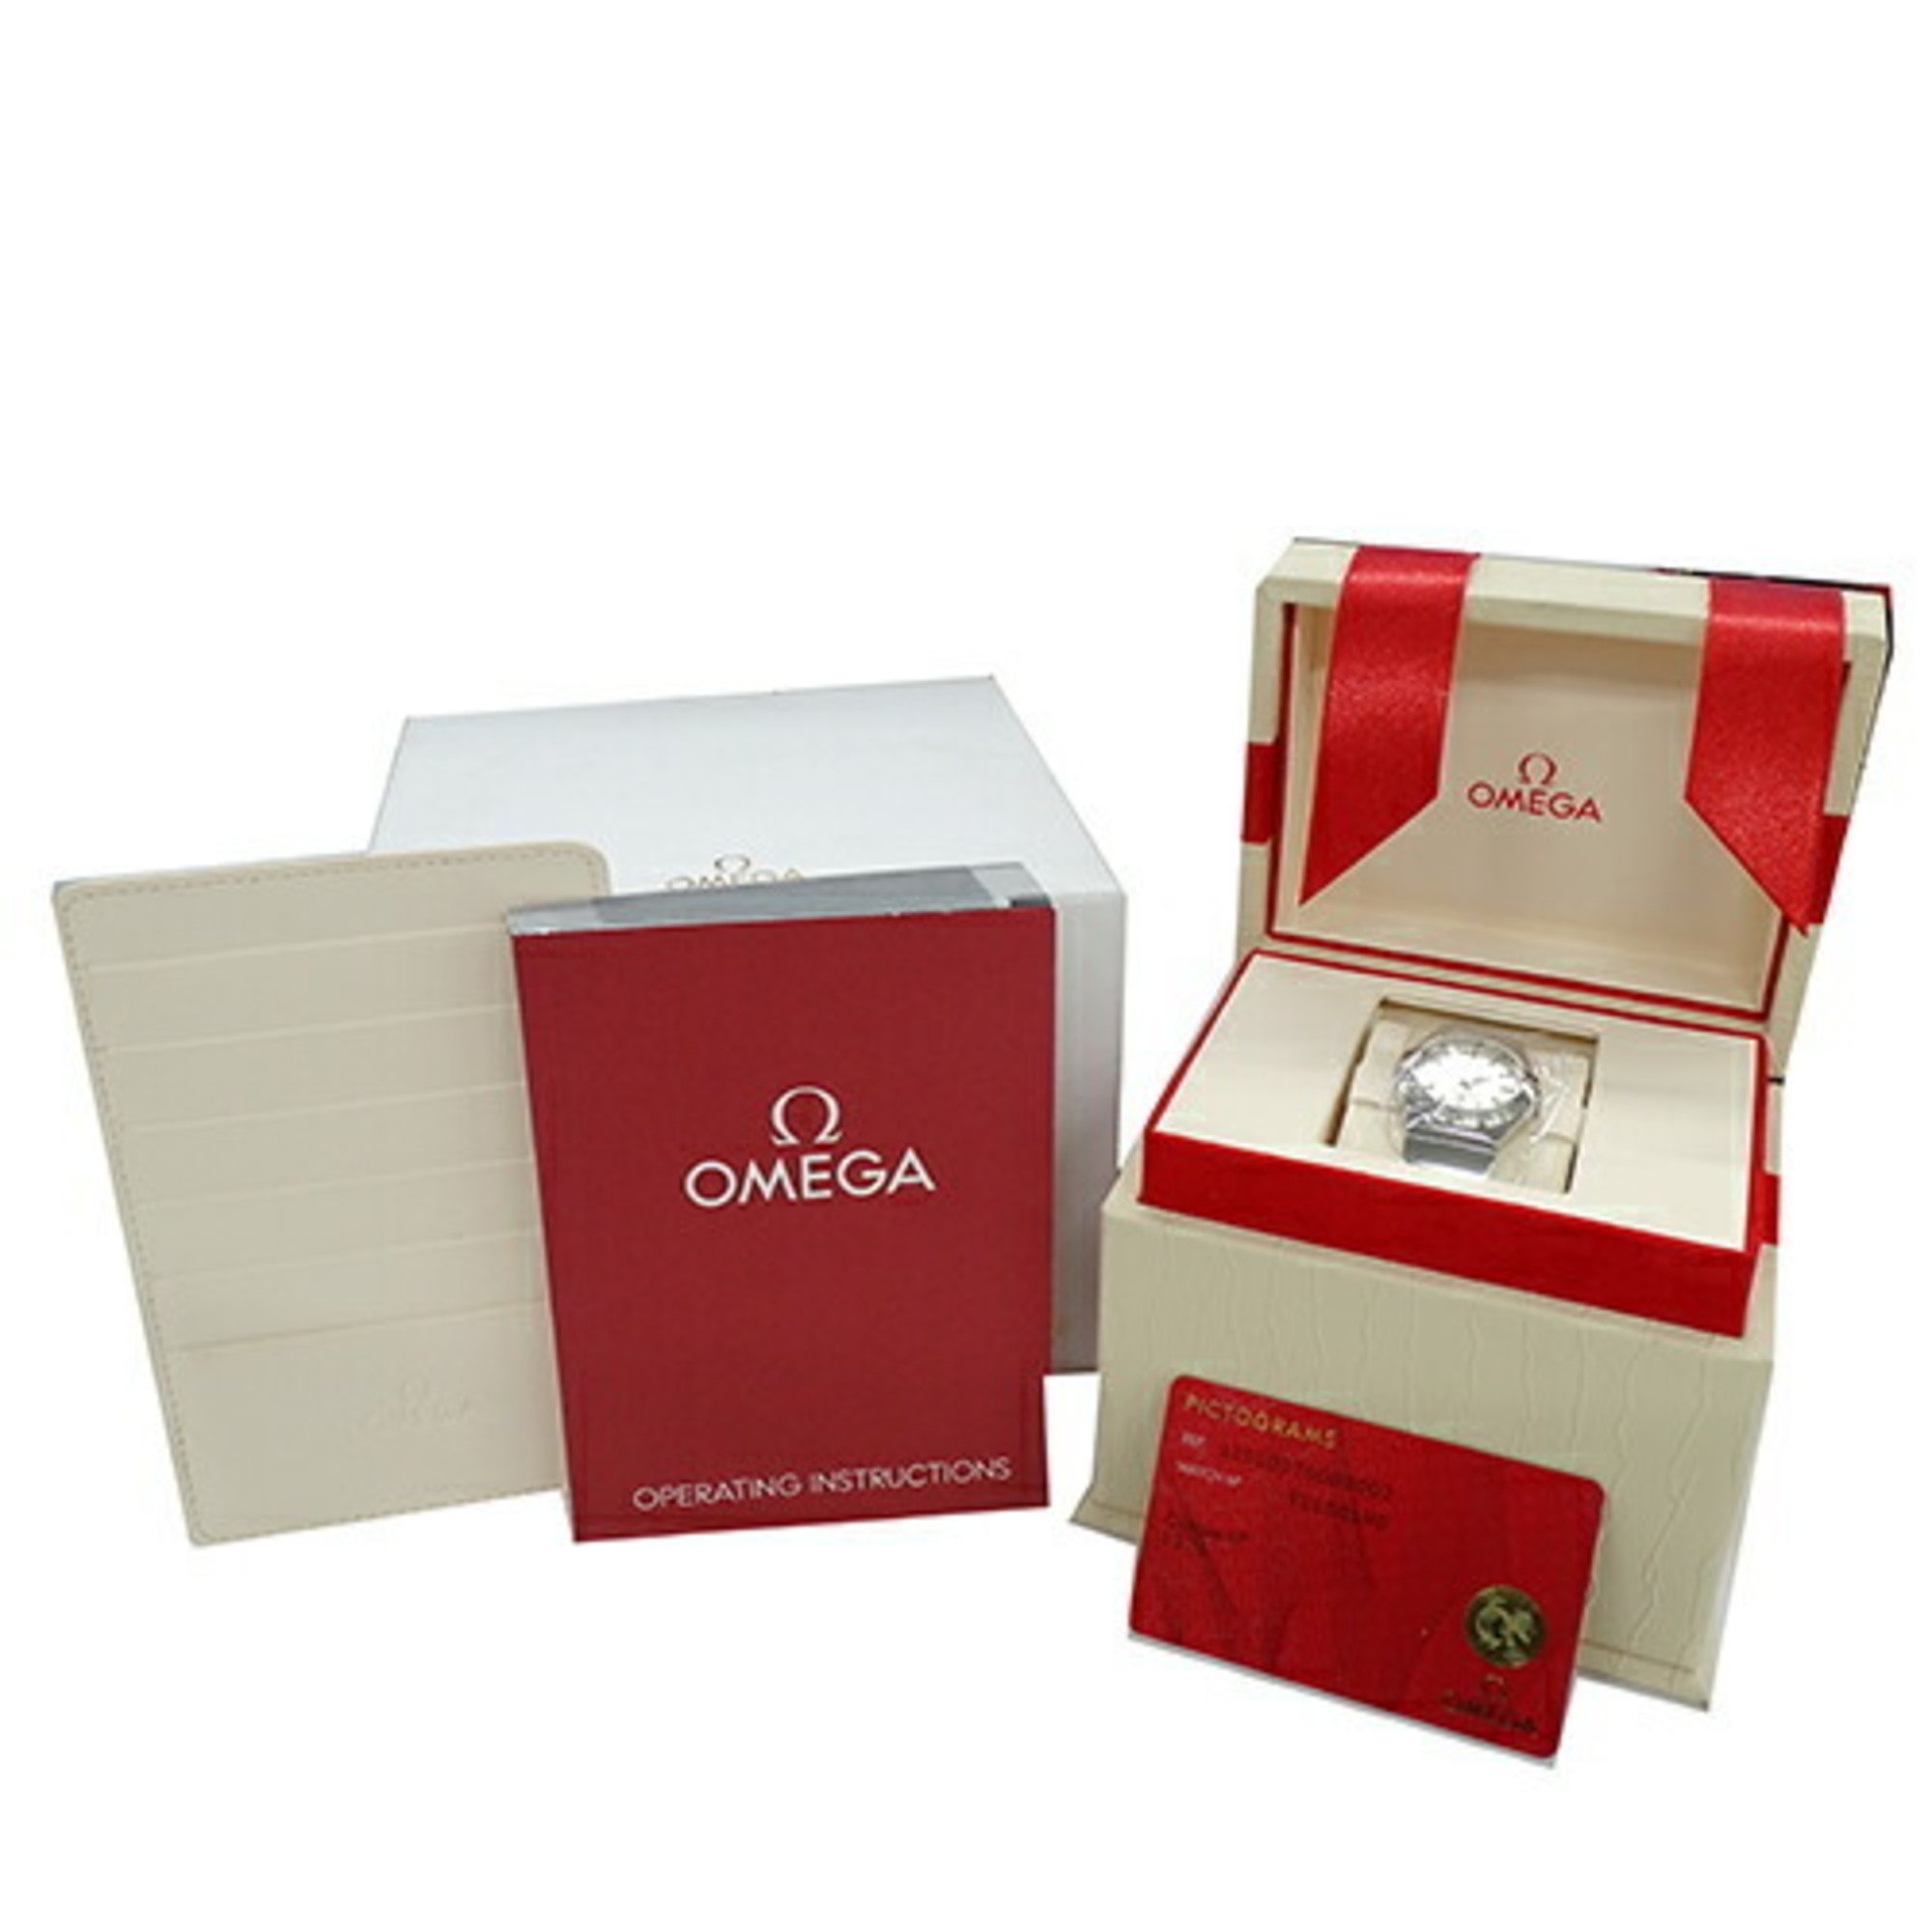 OMEGA Constellation 123.10.27.60.02.002 Ladies' Watch Quartz Stainless Steel SS Silver Polished